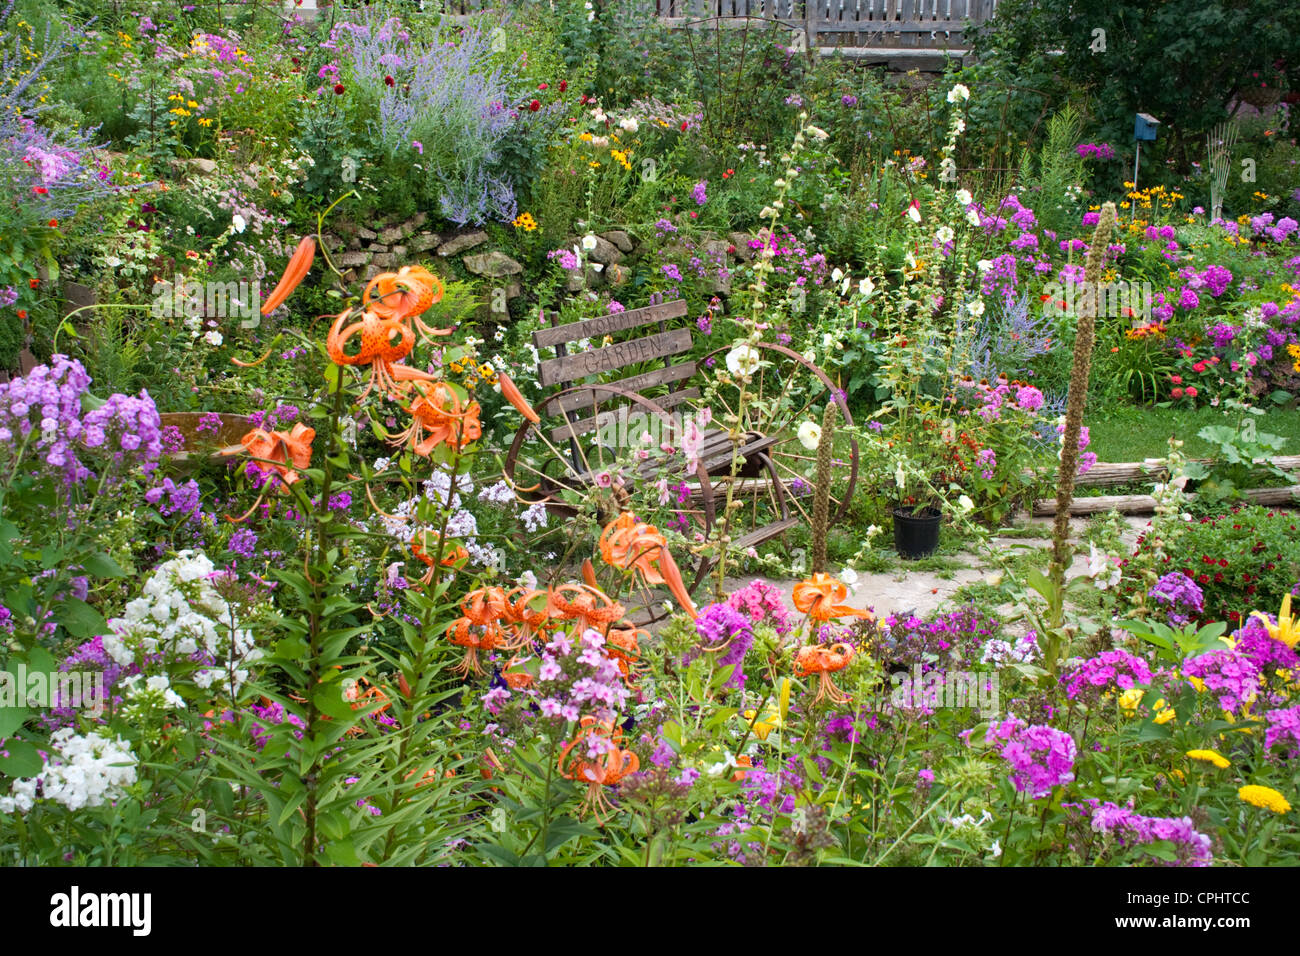 Large flower garden with meditative area containing an antique bench with spoked wheels. Lanesboro Minnesota MN USA Stock Photo